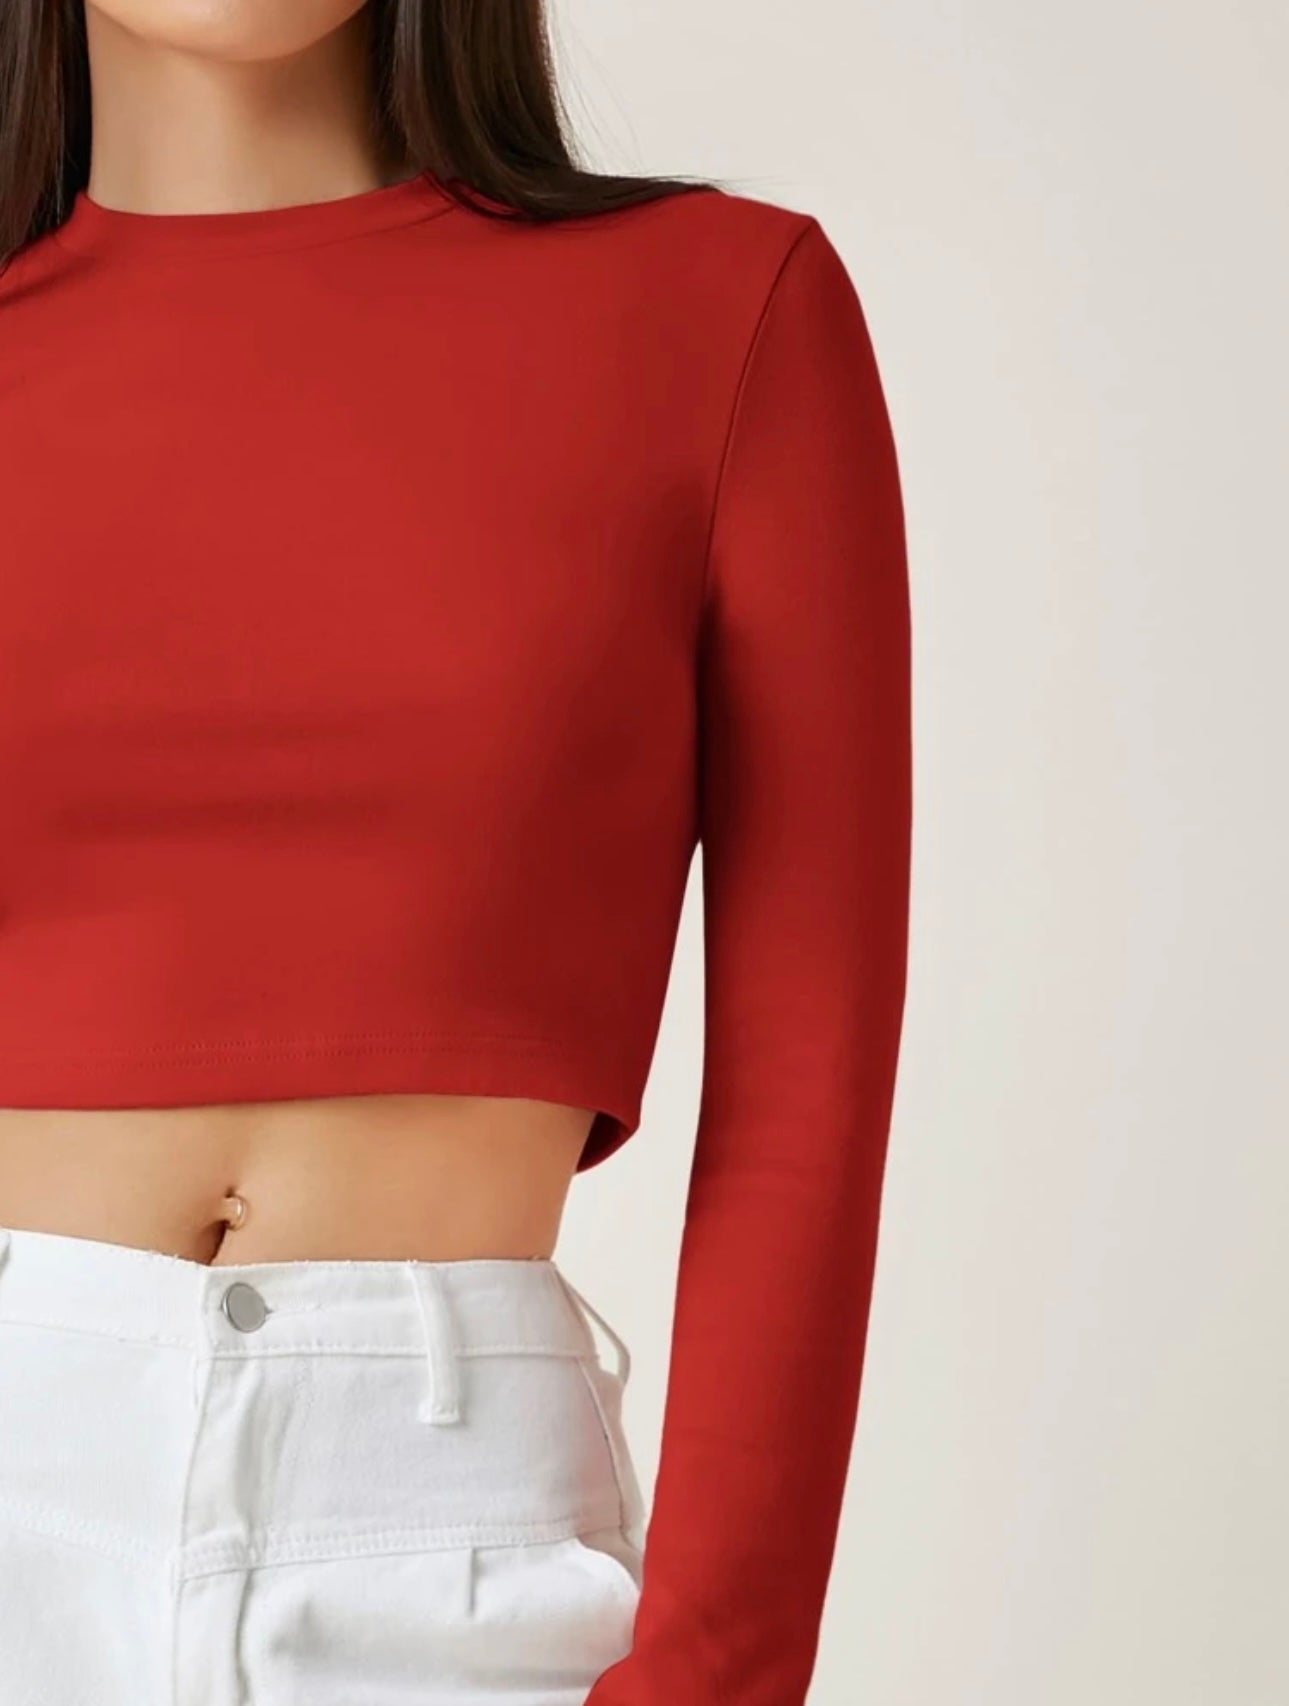 Teen Solid Red Slim Fitted Crop Top